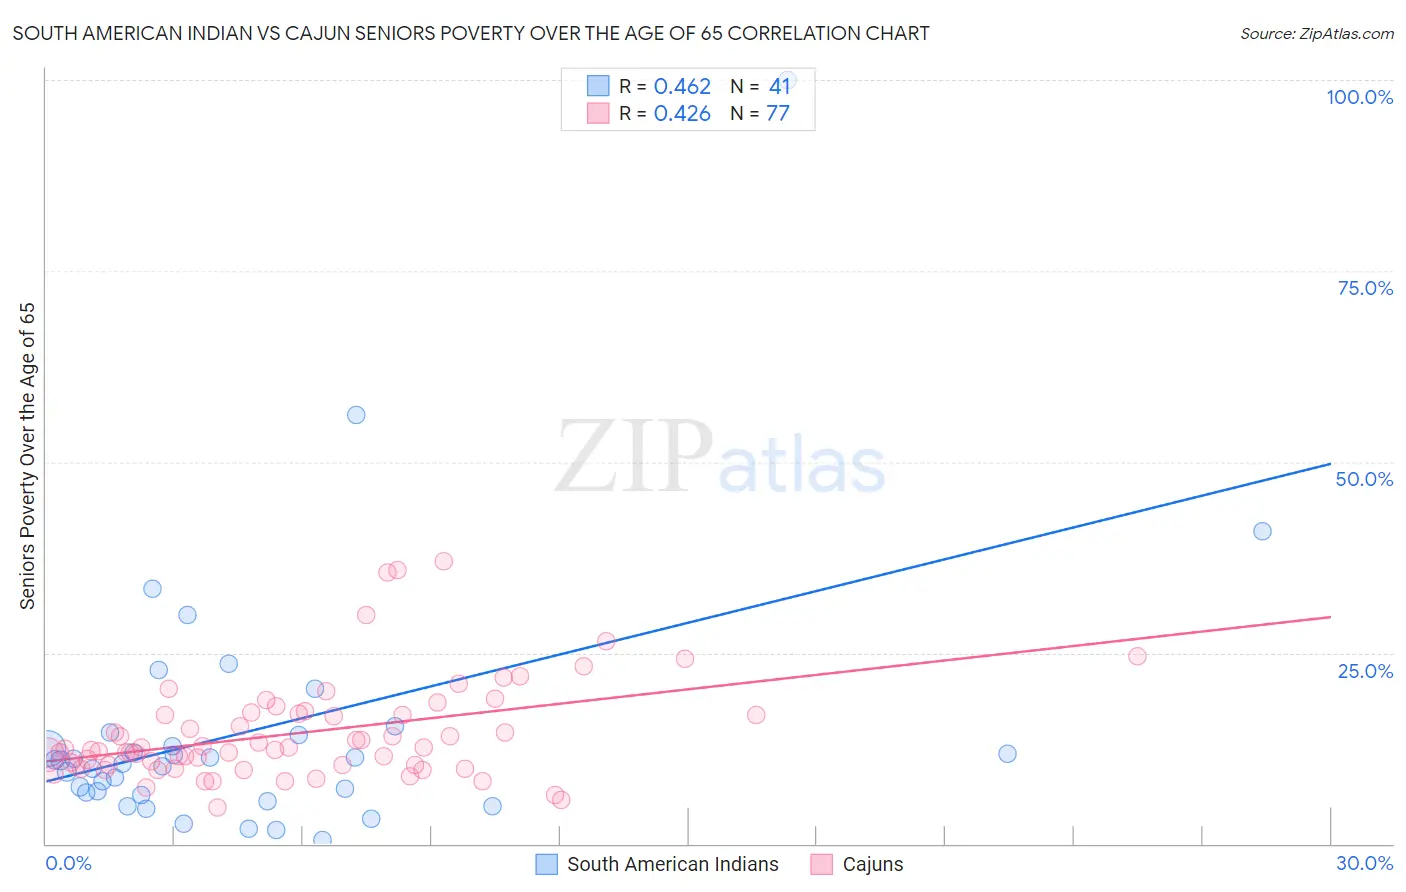 South American Indian vs Cajun Seniors Poverty Over the Age of 65